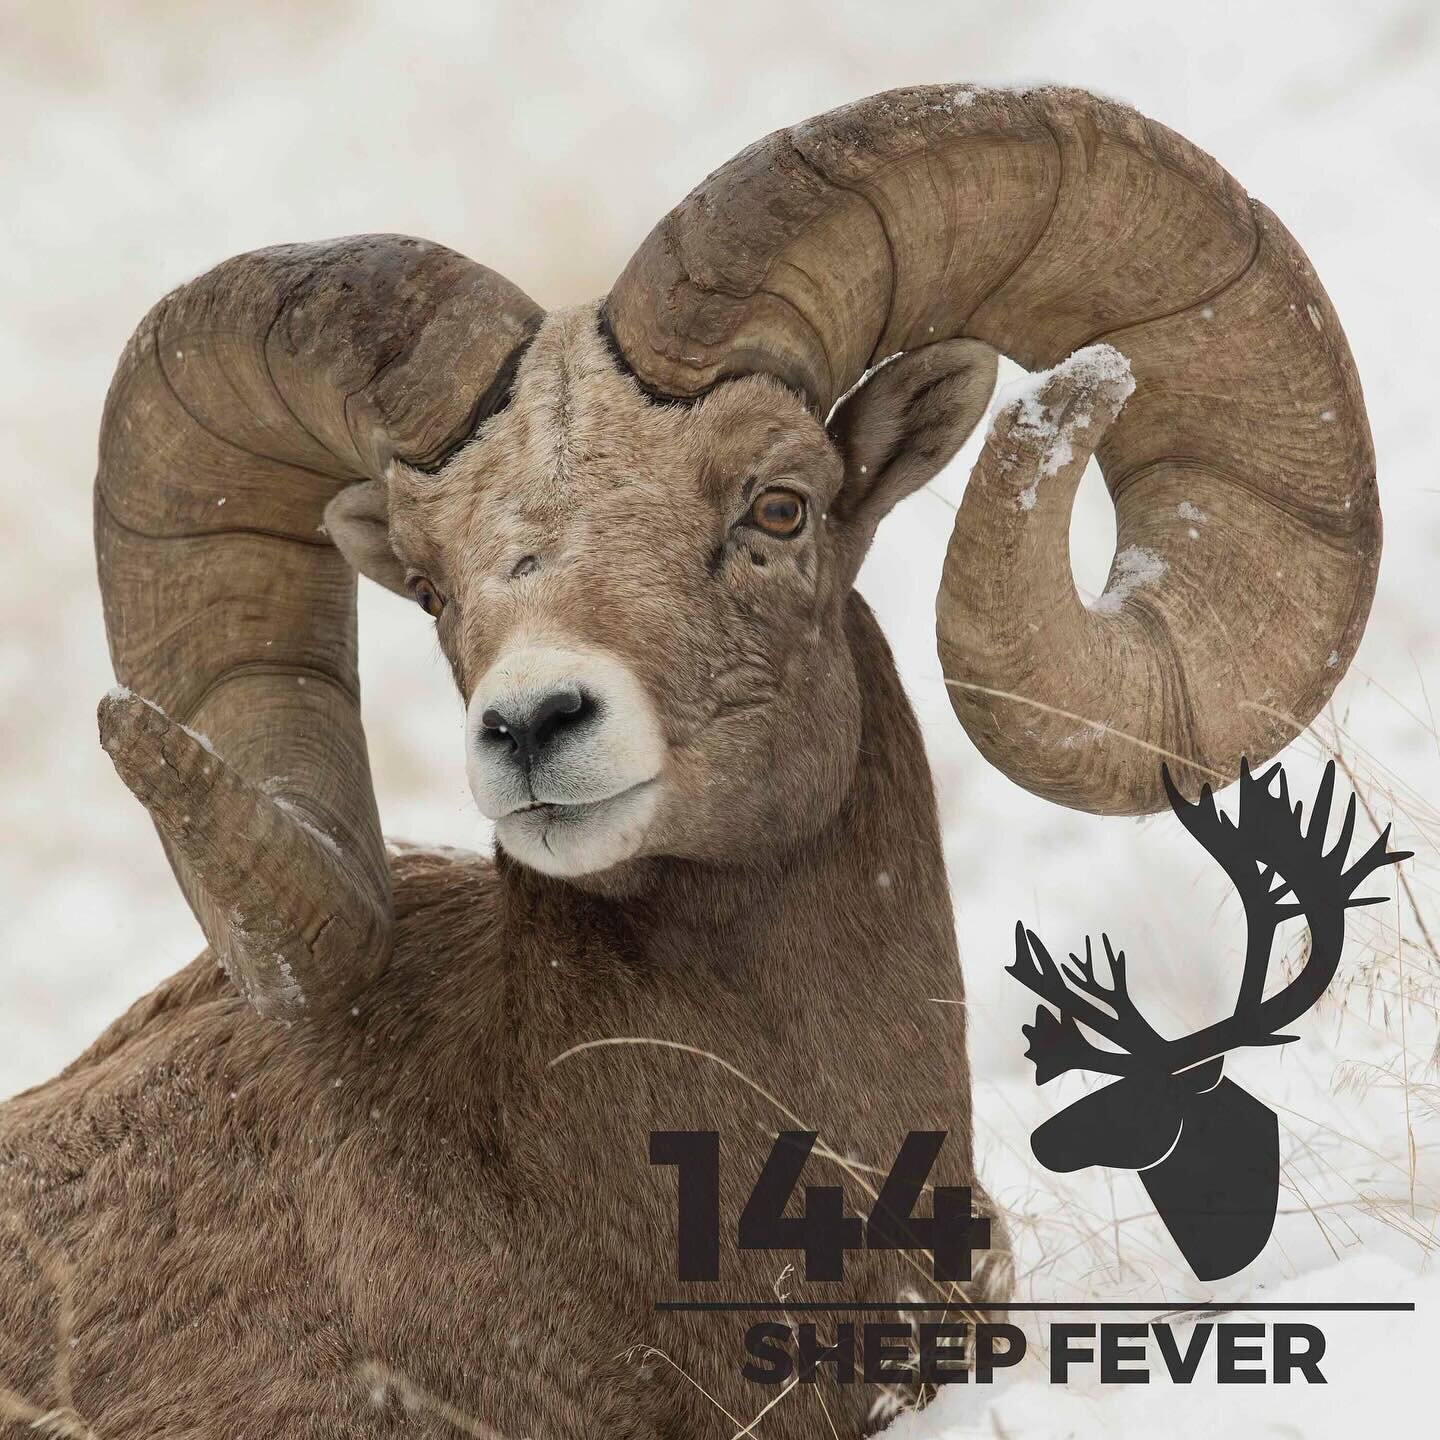 Today we welcome @graynthornton and @keithbalfourd from @wildsheepfoundation to talk all things sheep. You&rsquo;ll hear some highlights for Sheep Show 2024 (register now), info about WSF&rsquo;s incredible Women Hunt Program, you&rsquo;ll get a grea